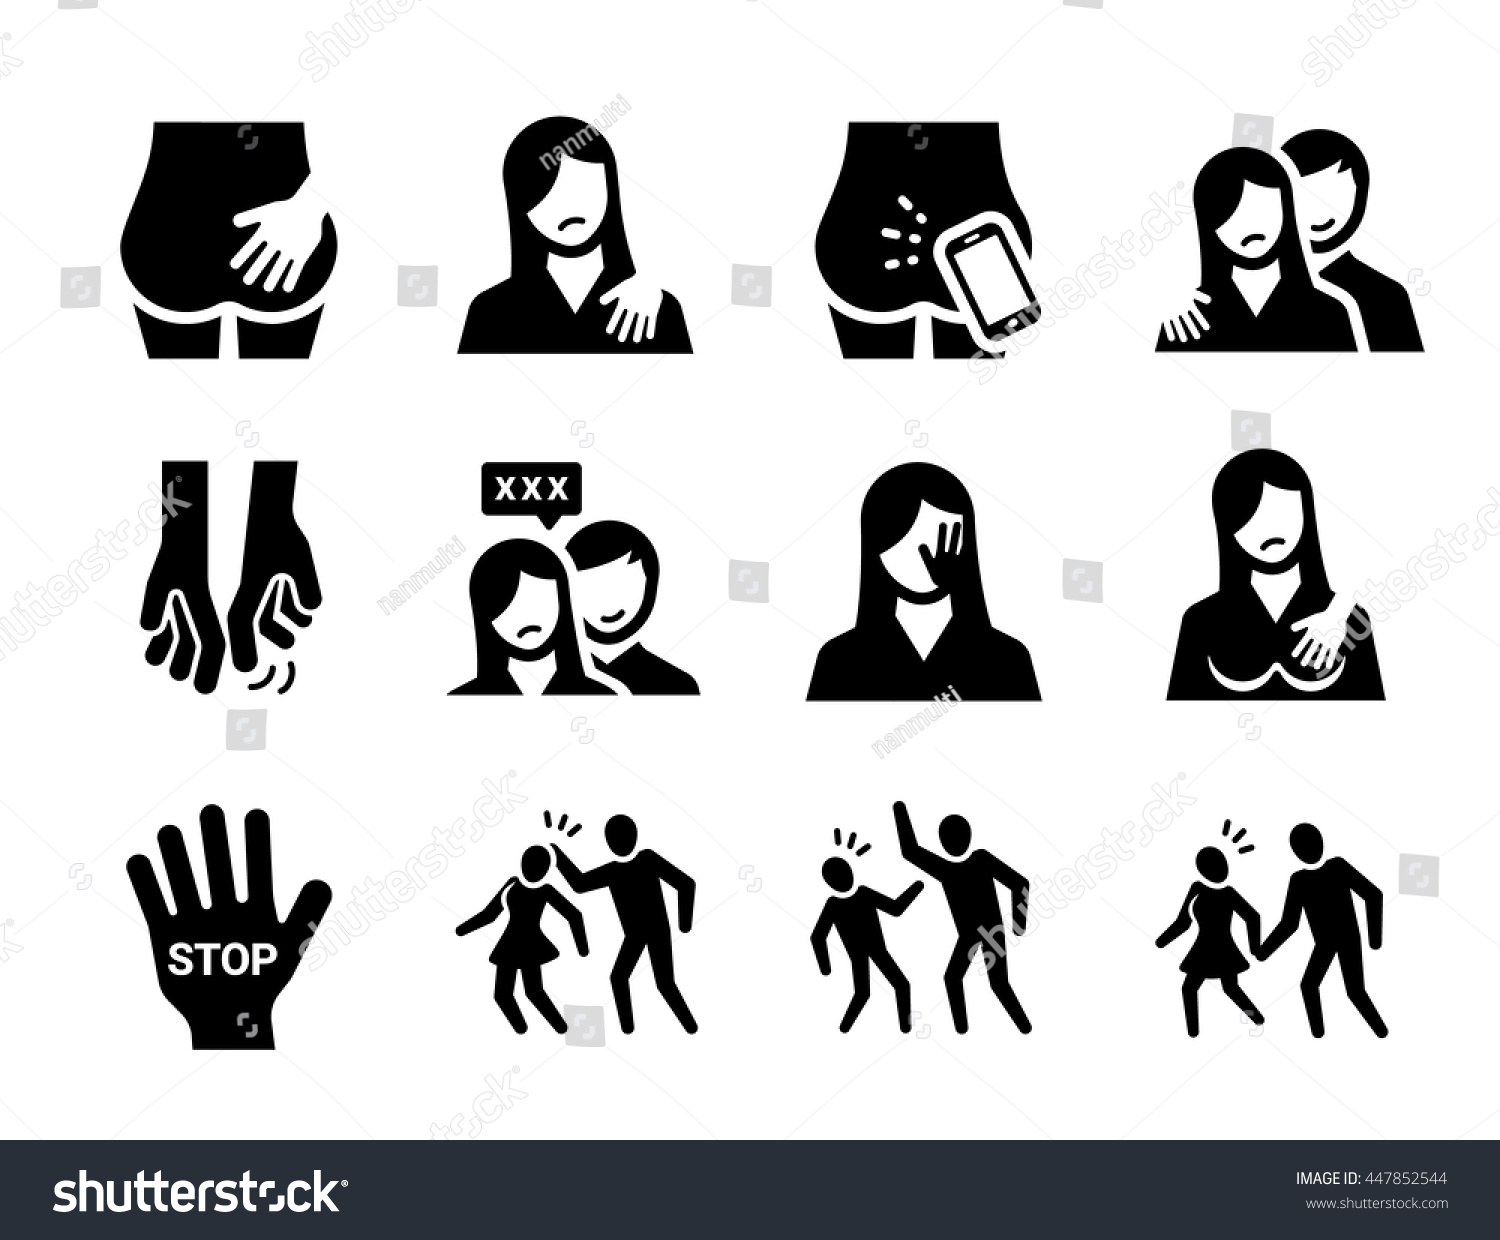 Sexual Harassment Vector Icon Set 447852544 Shutterstock 2512